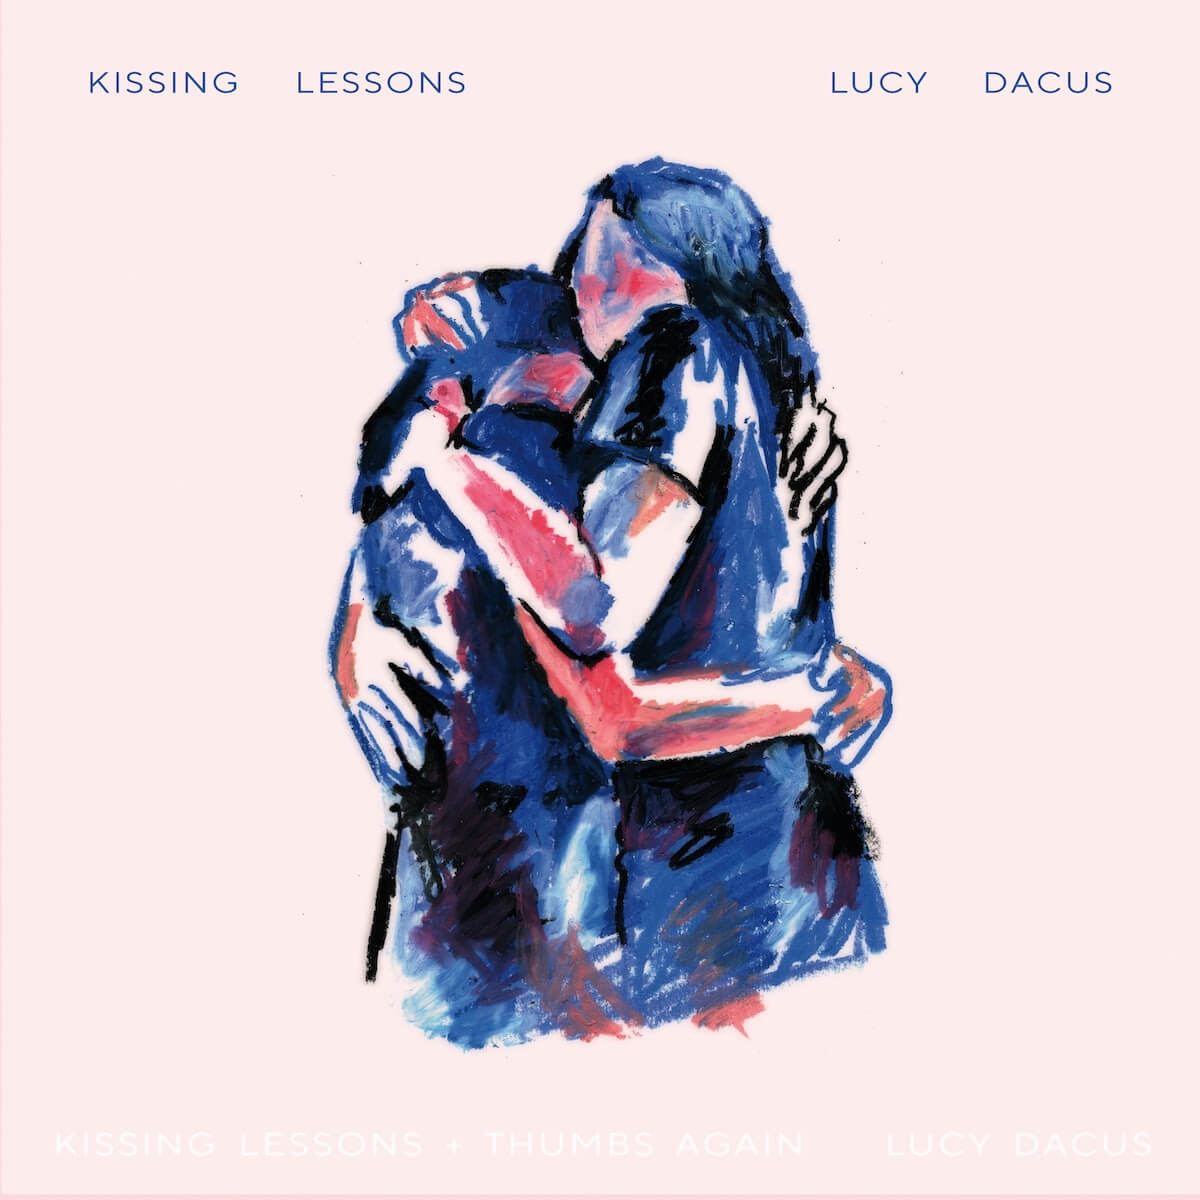 Lucy Dacus Debuts "Kissing Lessons" Video. The track is now available via Matador Records and various streaming services